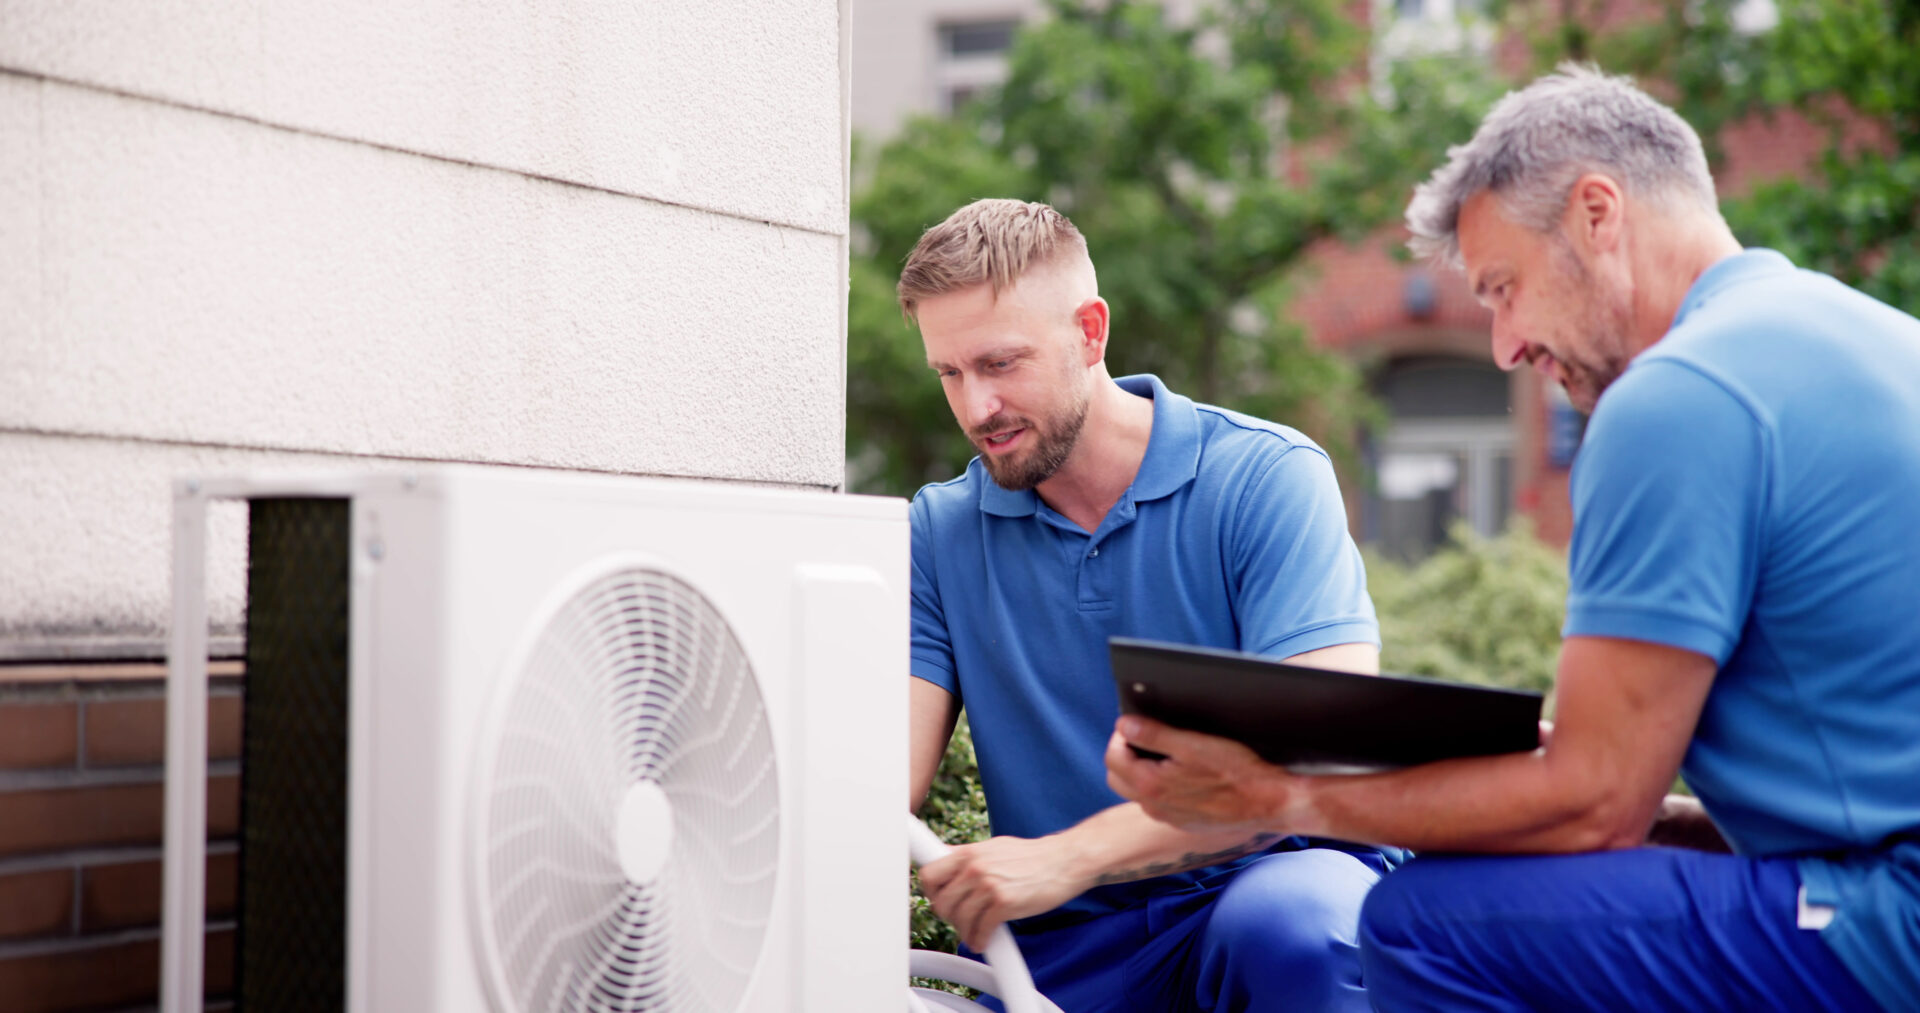 Two middle-aged men sit next to the wall in blue T-shirts and provide AC installation